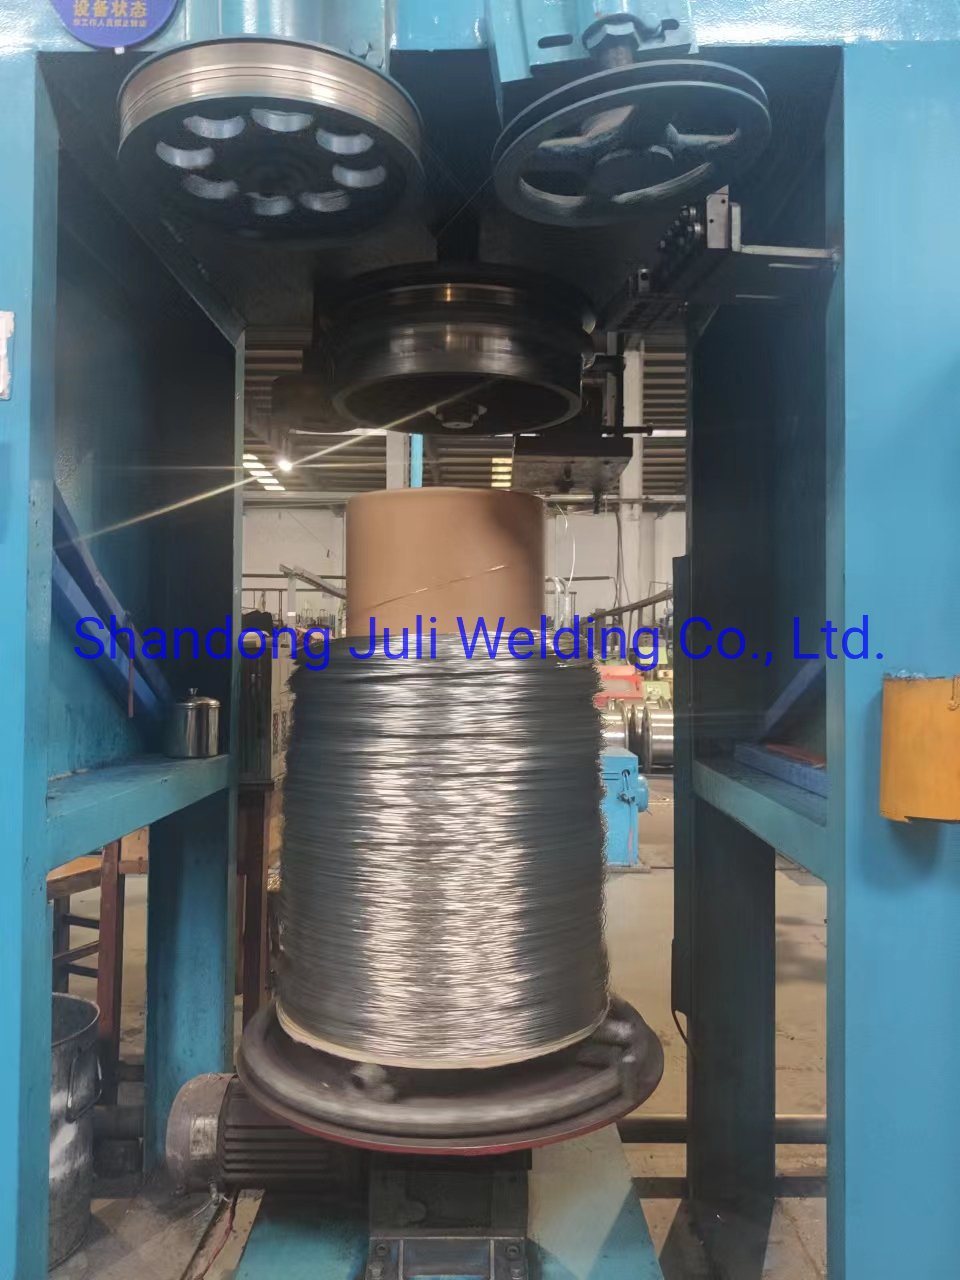 Conveying Net Use High Speed and Strength Quality Low Price Smooth Stainless Steel Wea Stainless Steel Weaving, Braiding Wire